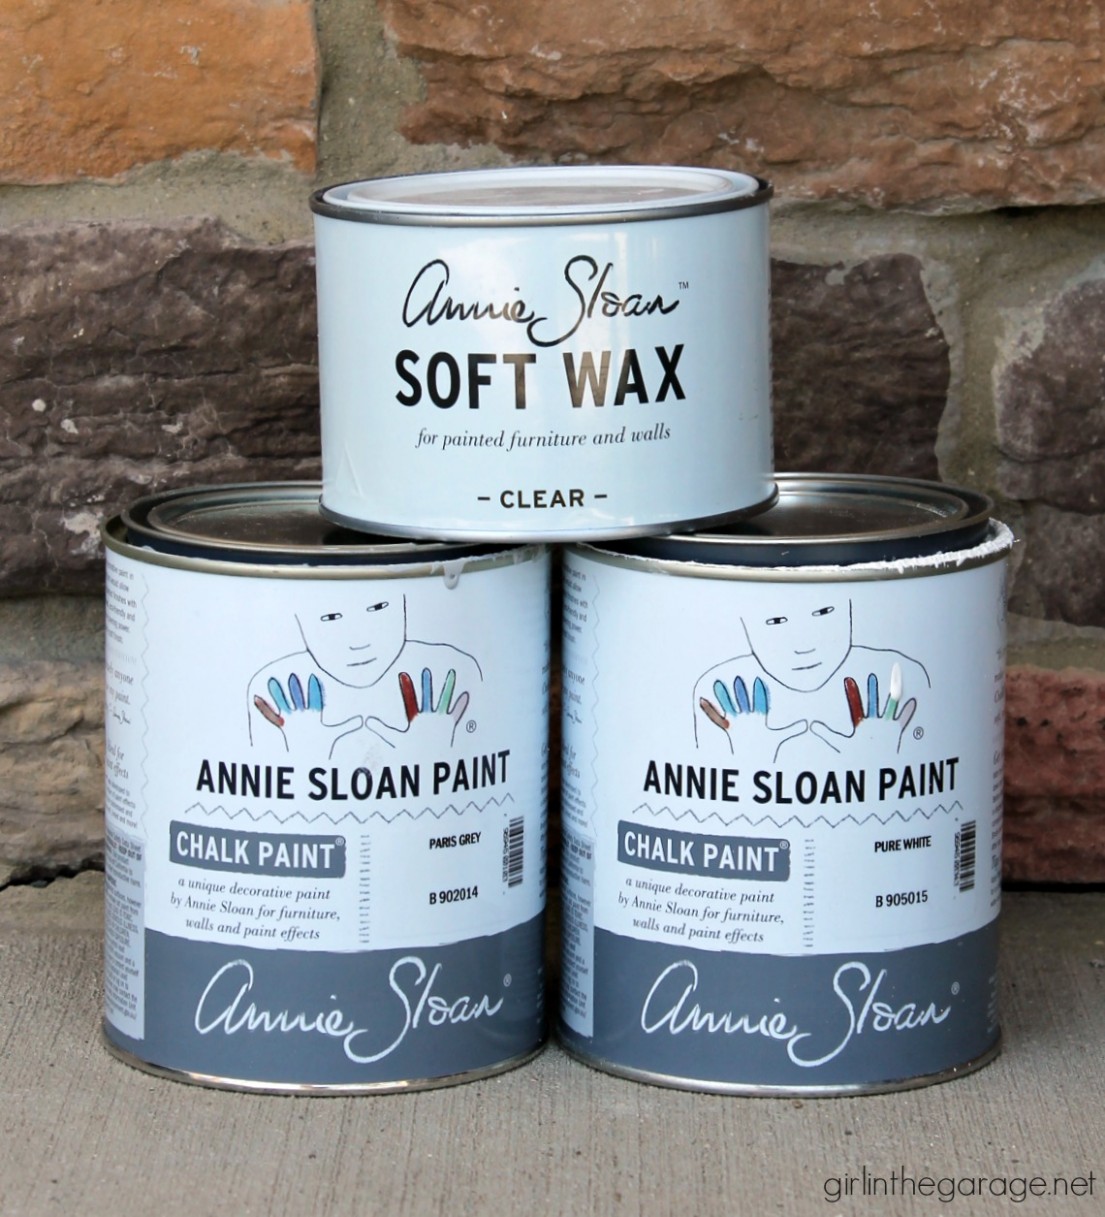 Img 8 Annie Sloan Chalk Paint Wax Girl In The Garage® Annie Sloan Chalk Paint Wax Clear